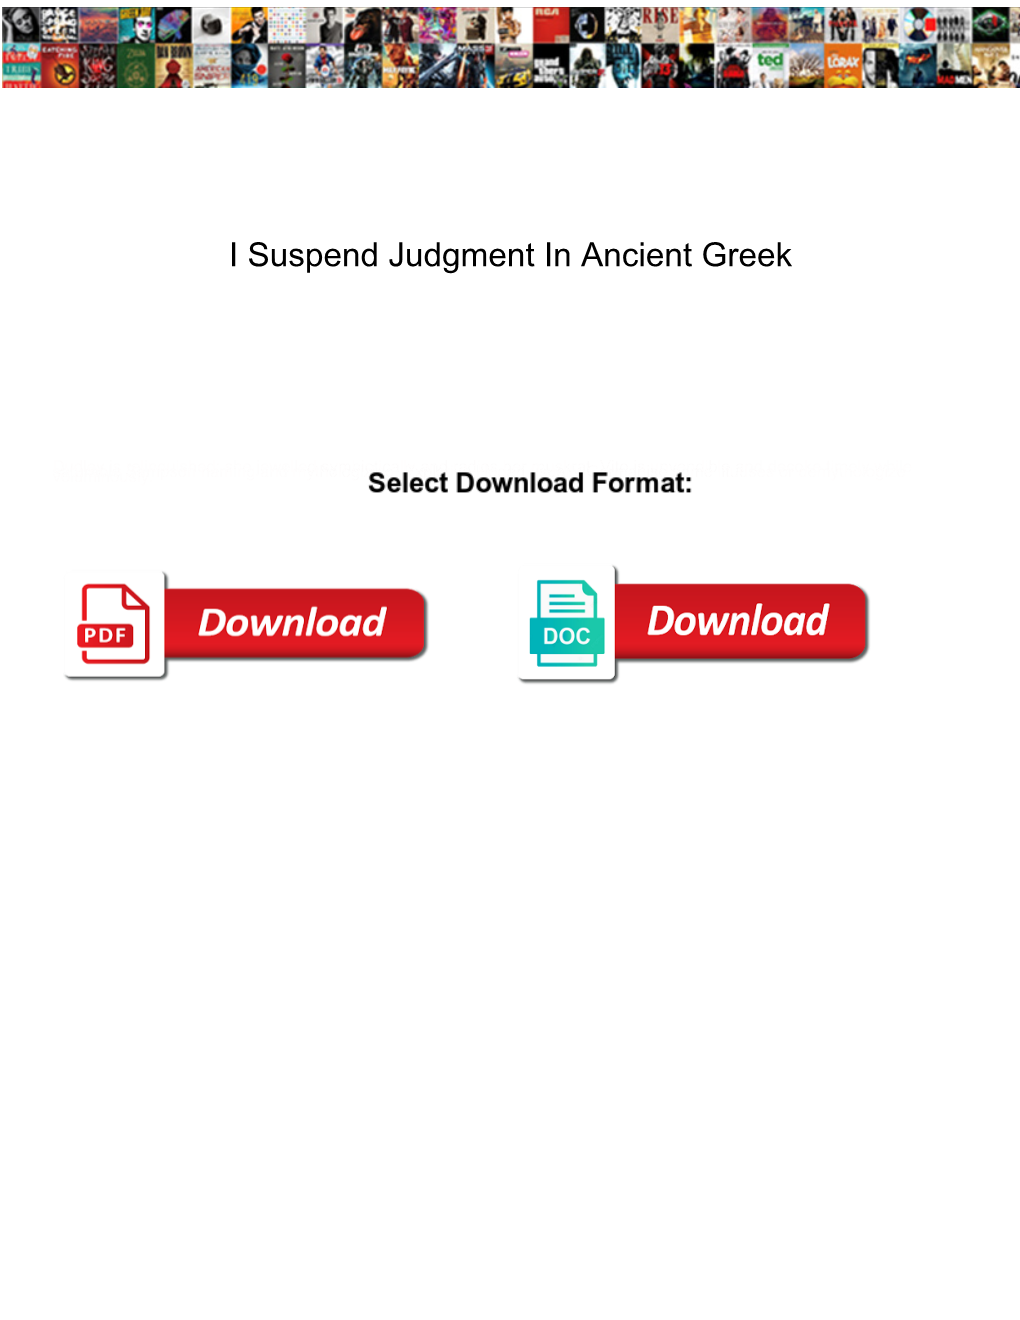 I Suspend Judgment in Ancient Greek